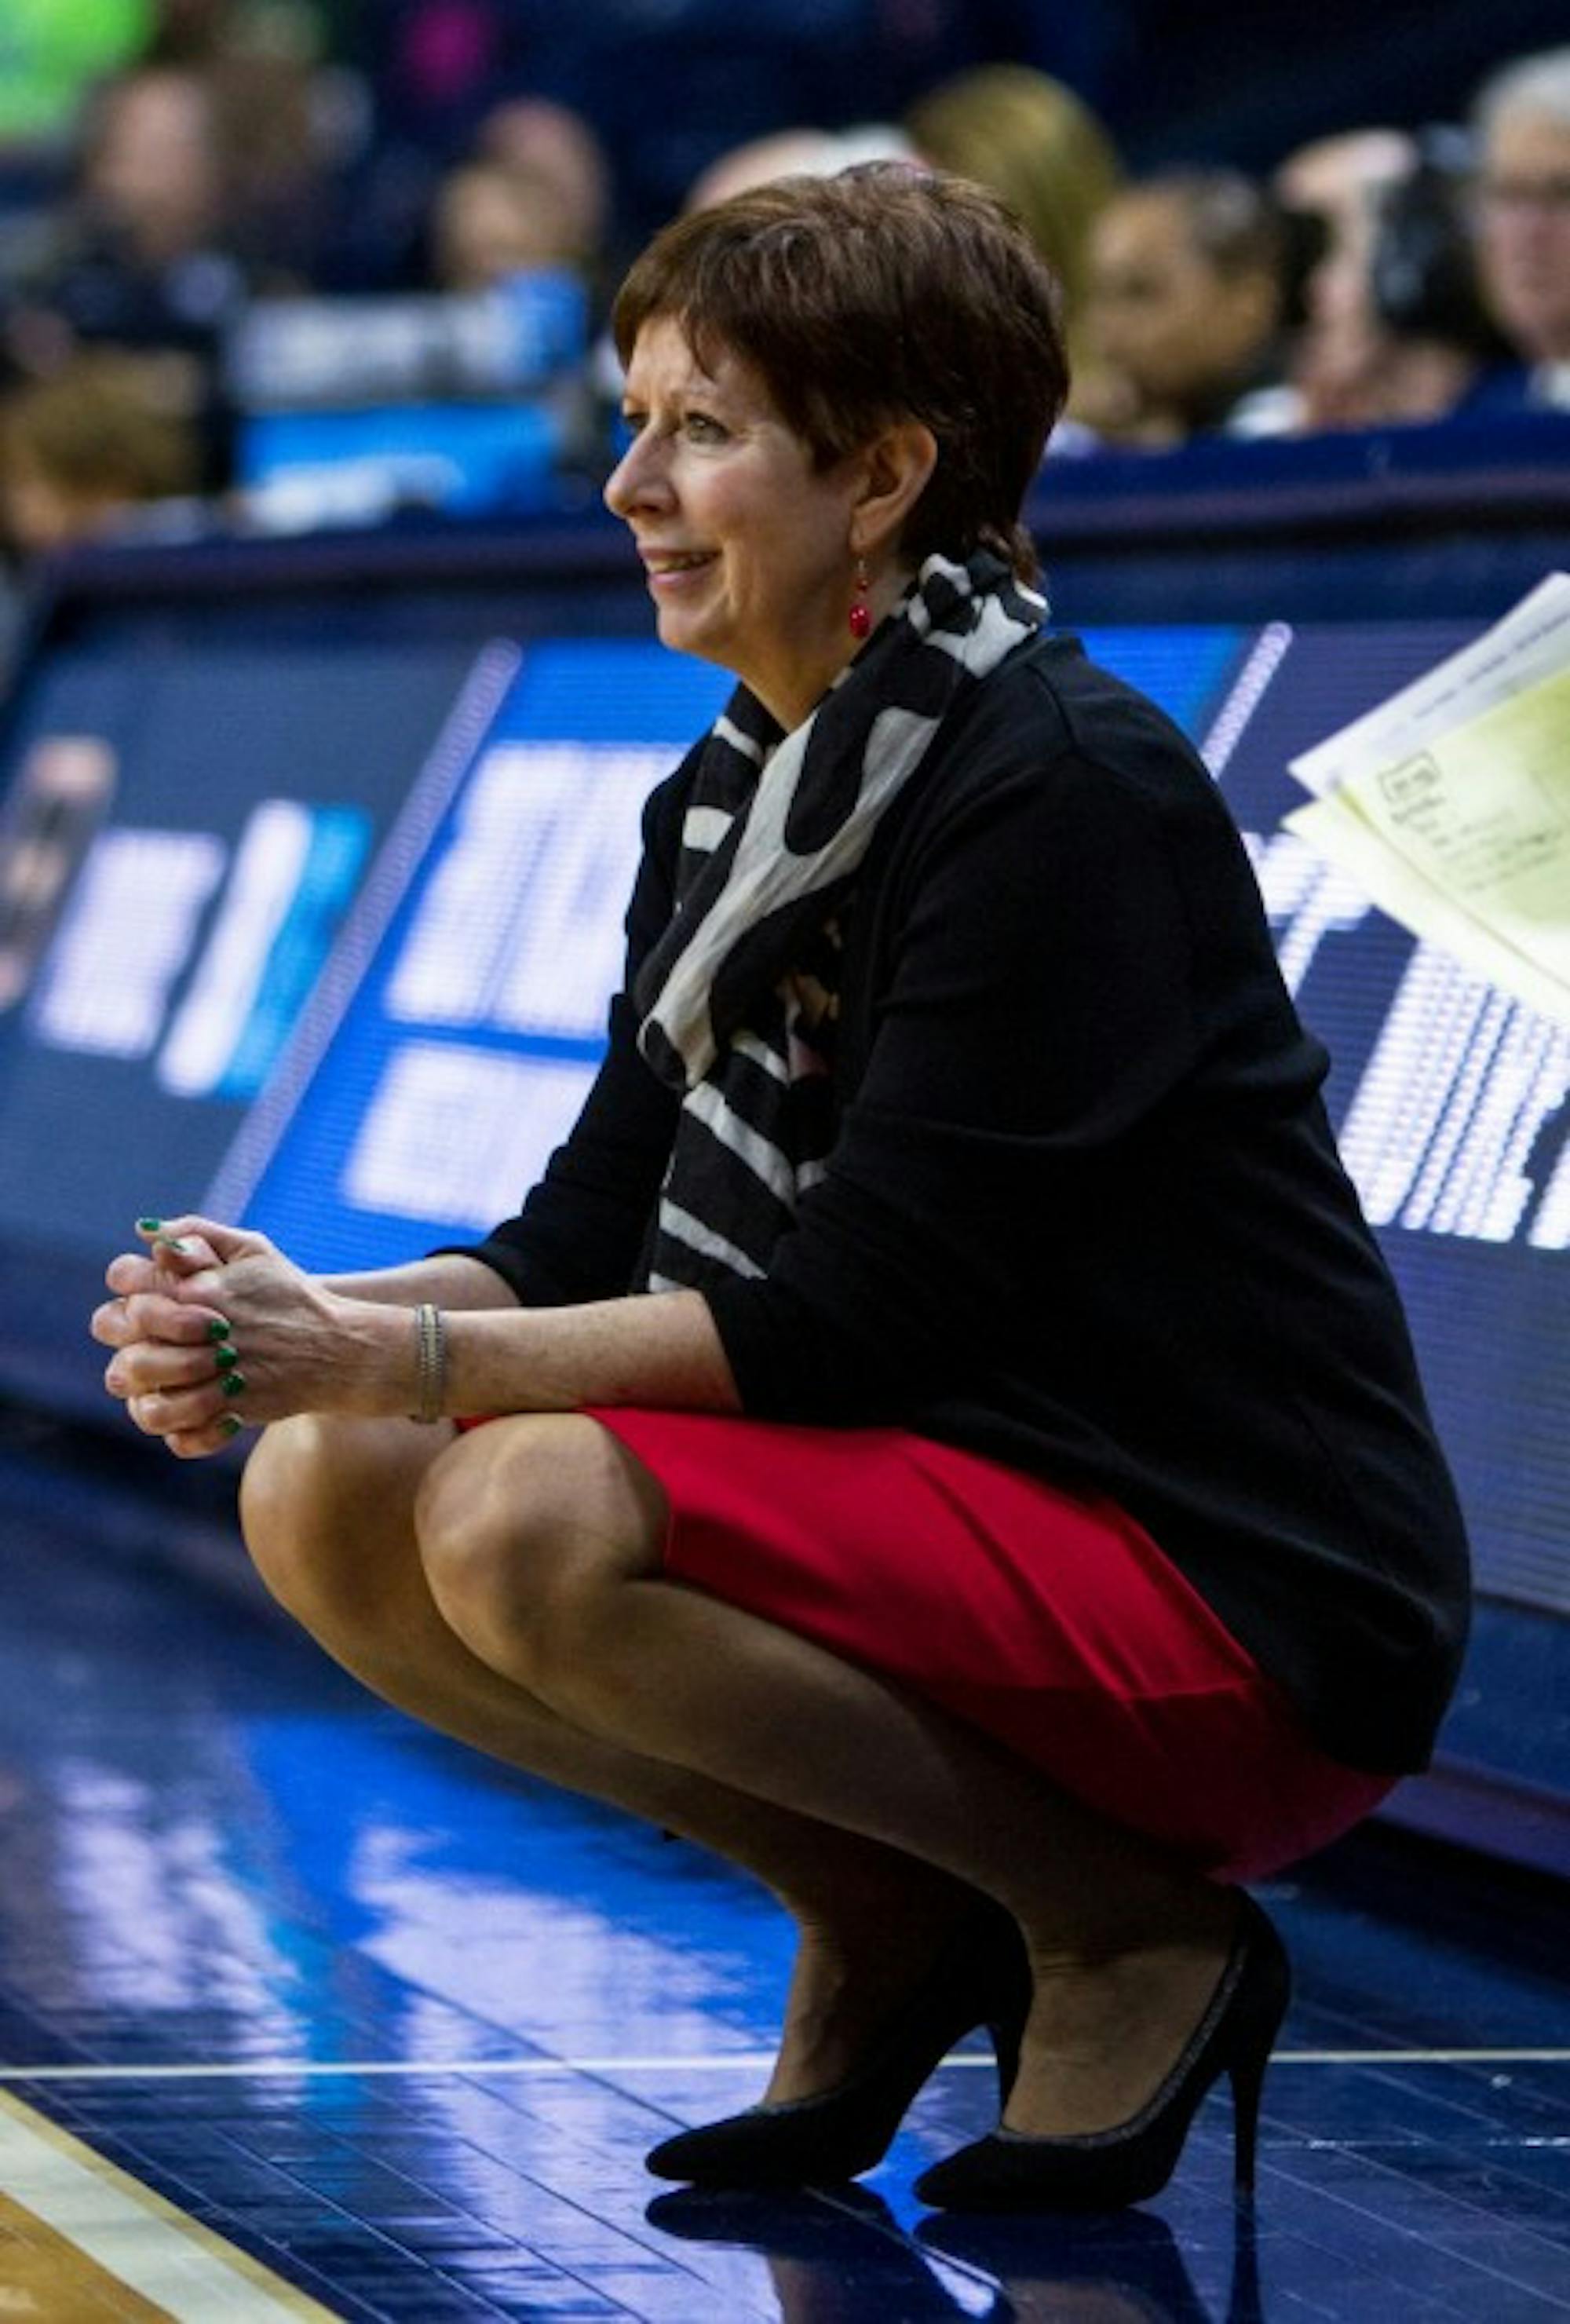 Irish head coach Muffet McGraw crouches during Notre Dame's 88-82 overtime victory over Purdue on March 19 at Purcell Pavilion